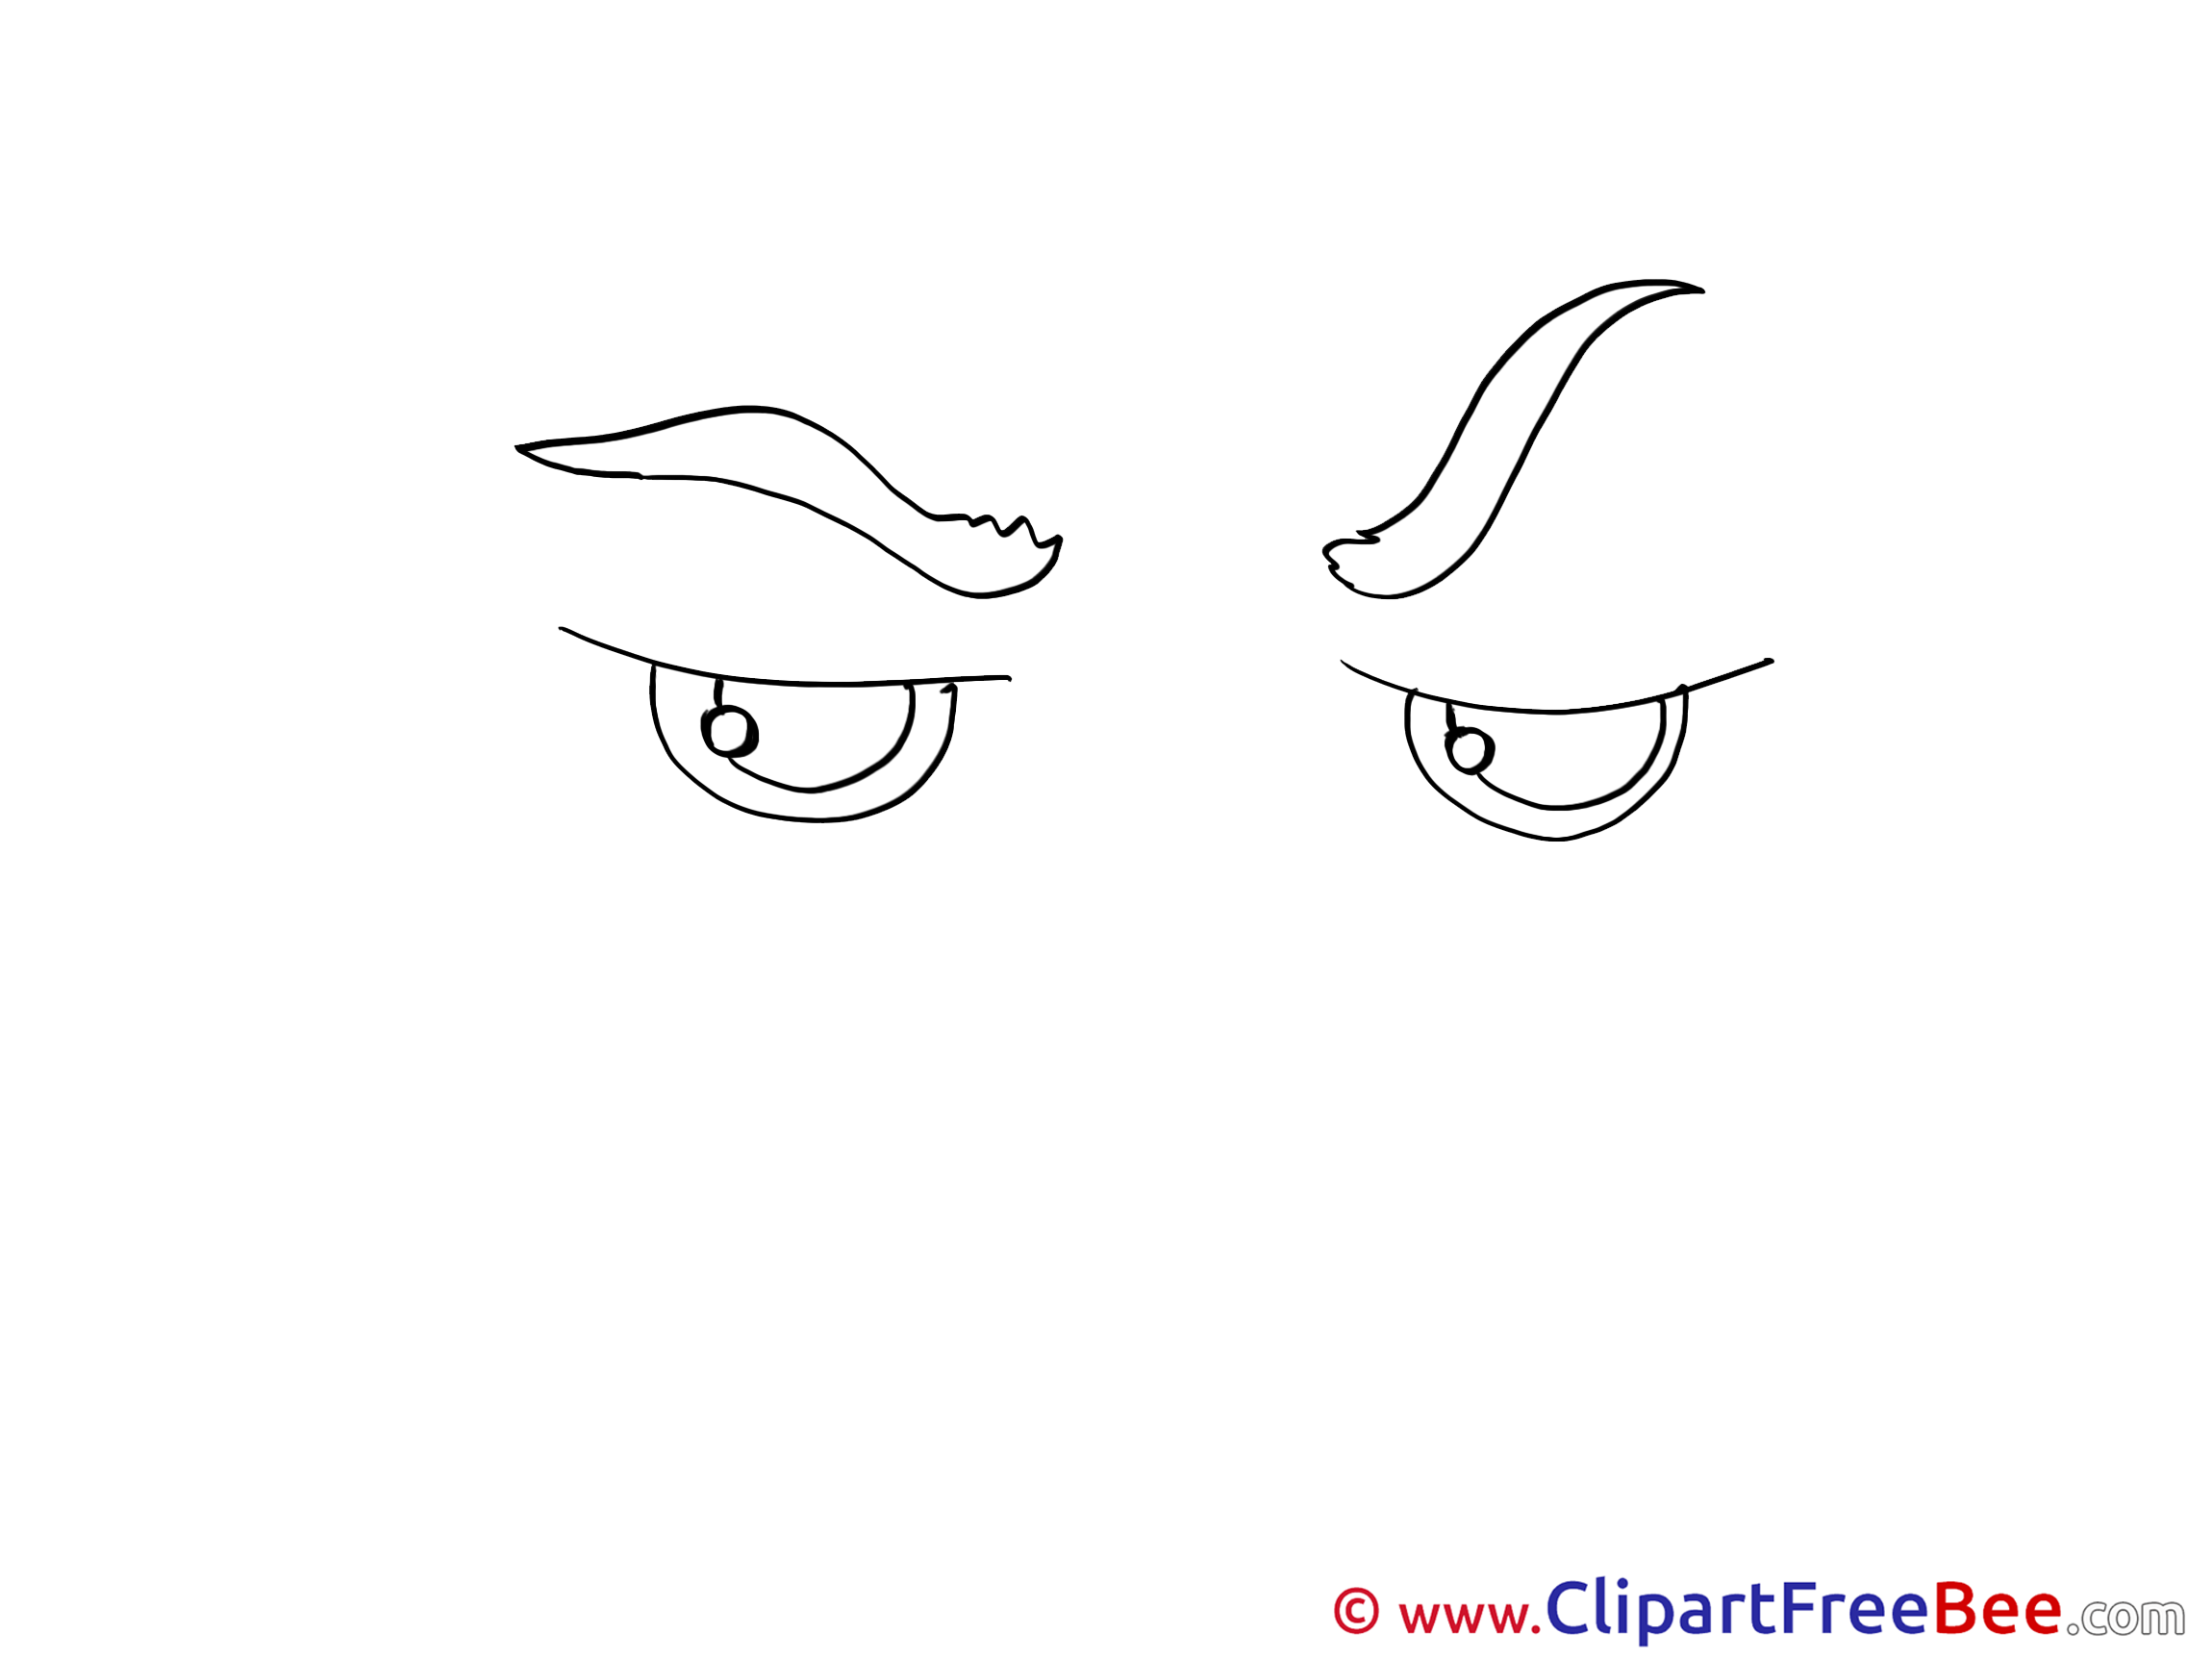 Incredulous Look free Cliparts for download